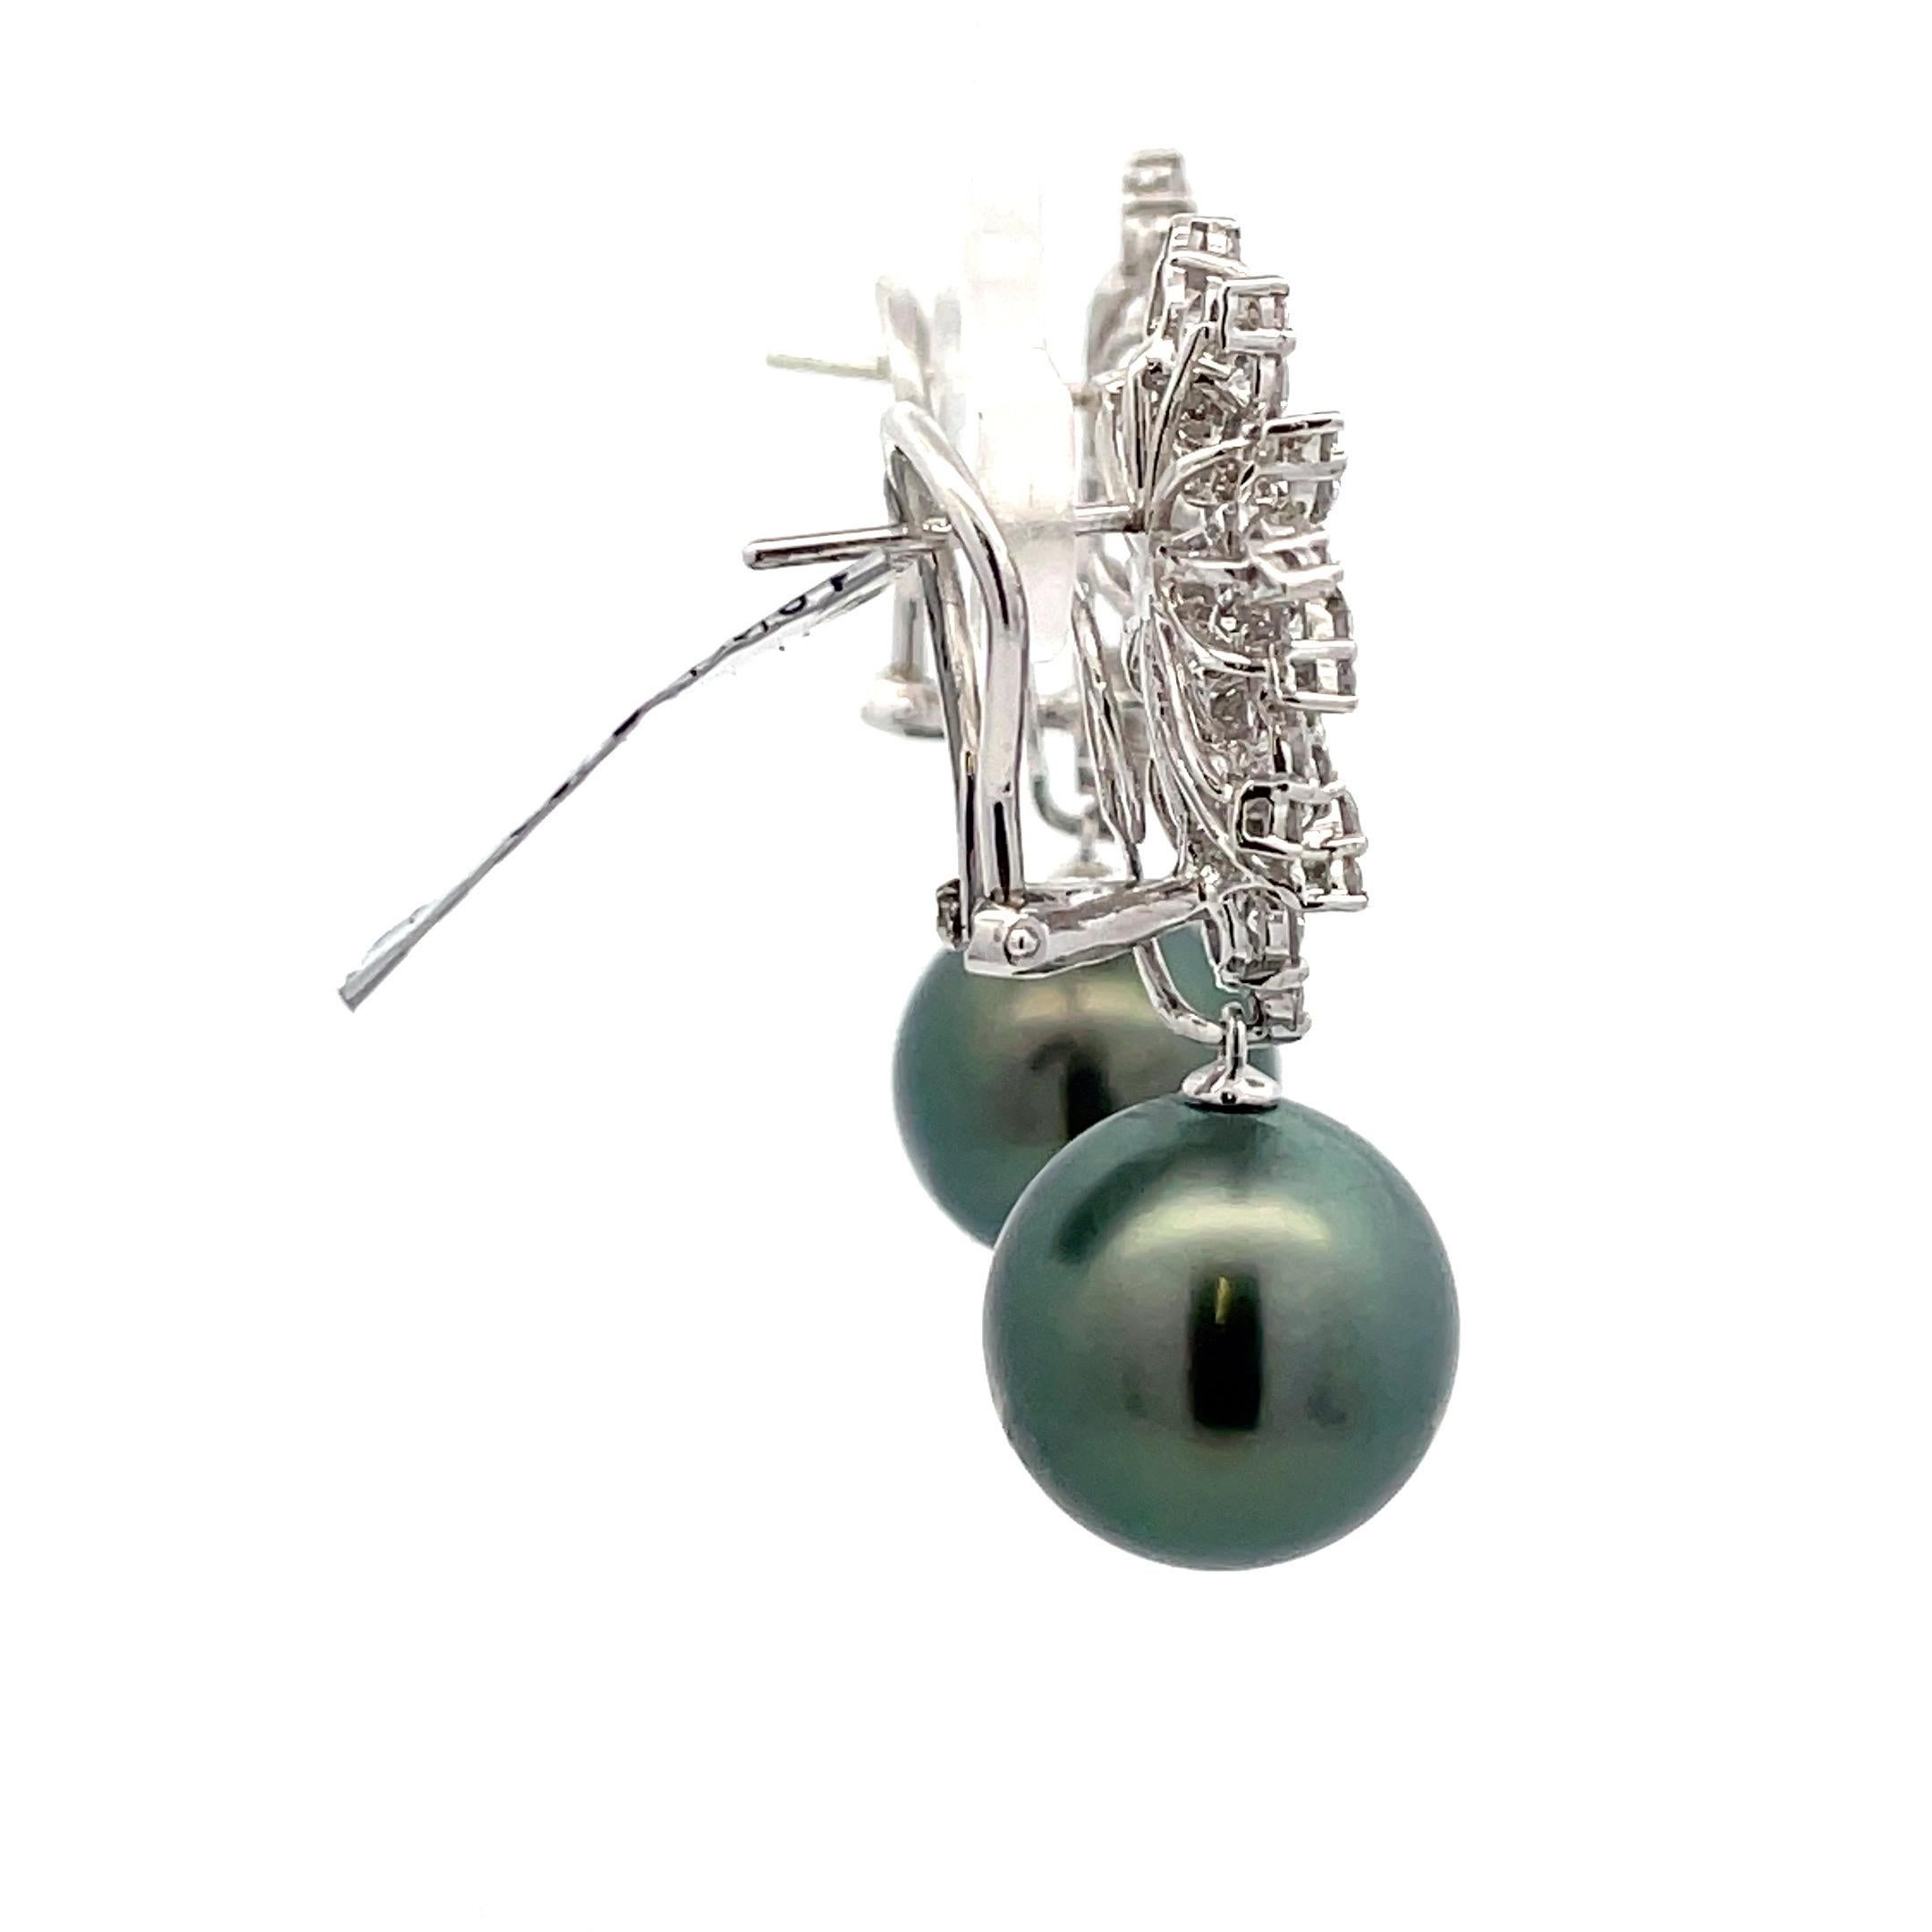 18 Karat White Gold drop earrings featuring 96 Round brilliants weighing 2.88 Carats with two Tahitian Pearls measuring 13-14 MM.

Pearls can be changed to South Sea, Pink, Golden & Tahitian
DM for more videos & pricing.
Search Harbor Diamonds for